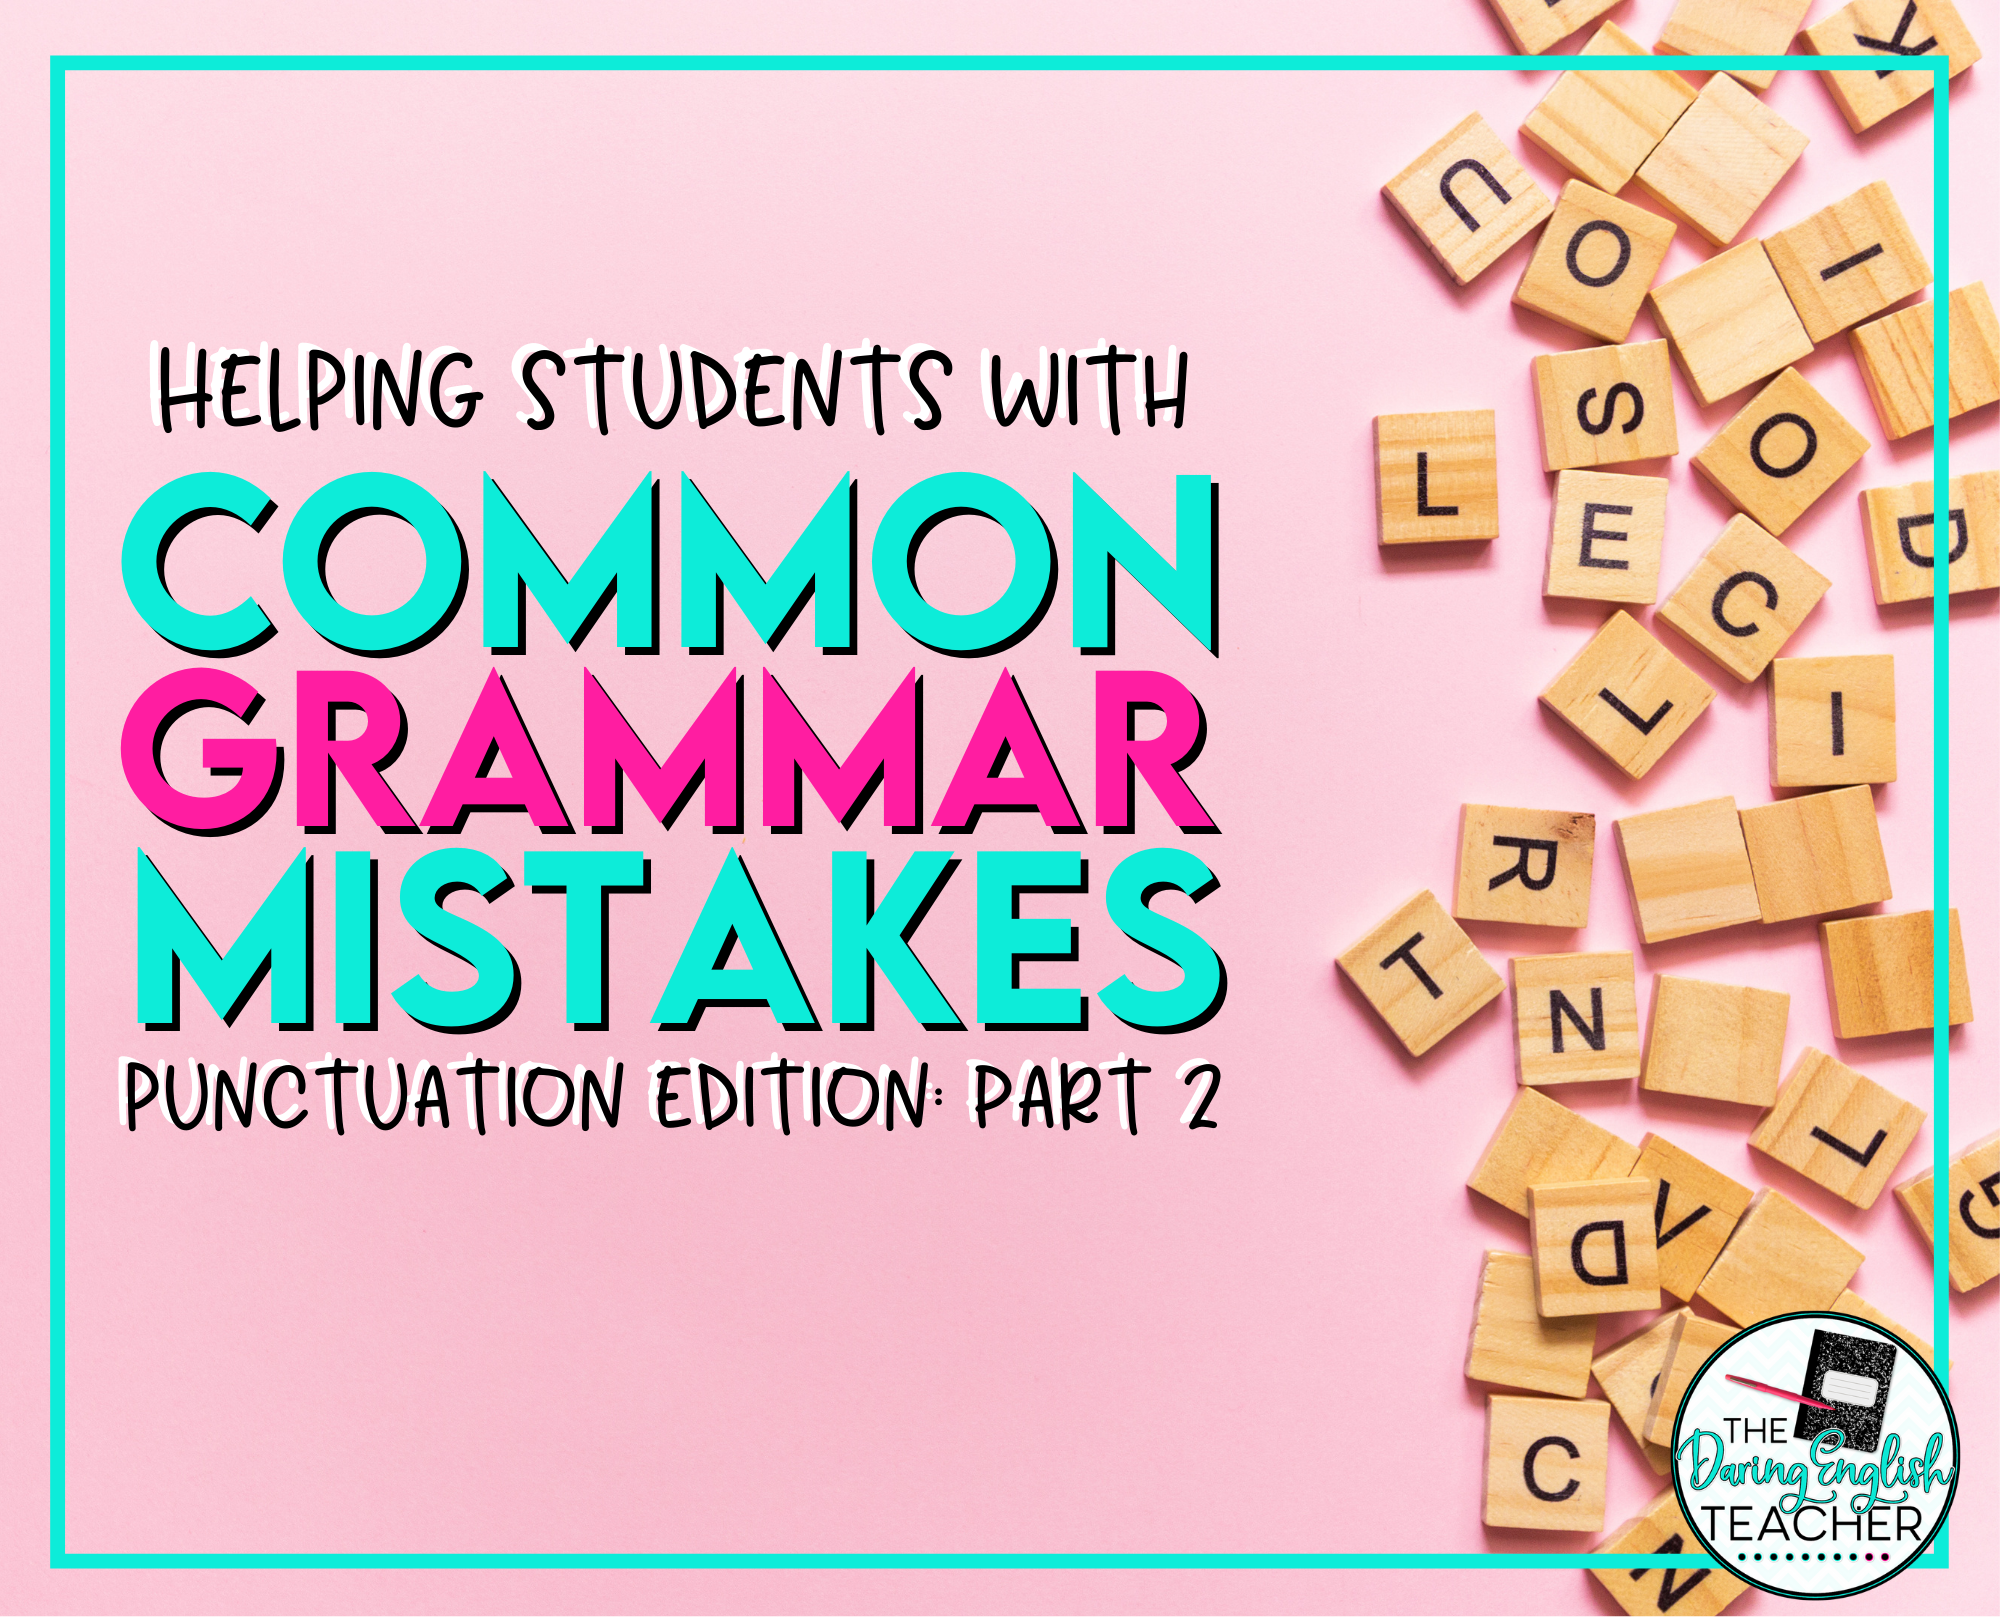 Common Grammar Mistakes: Punctuation Edition, Part II - Apostrophes and Commas